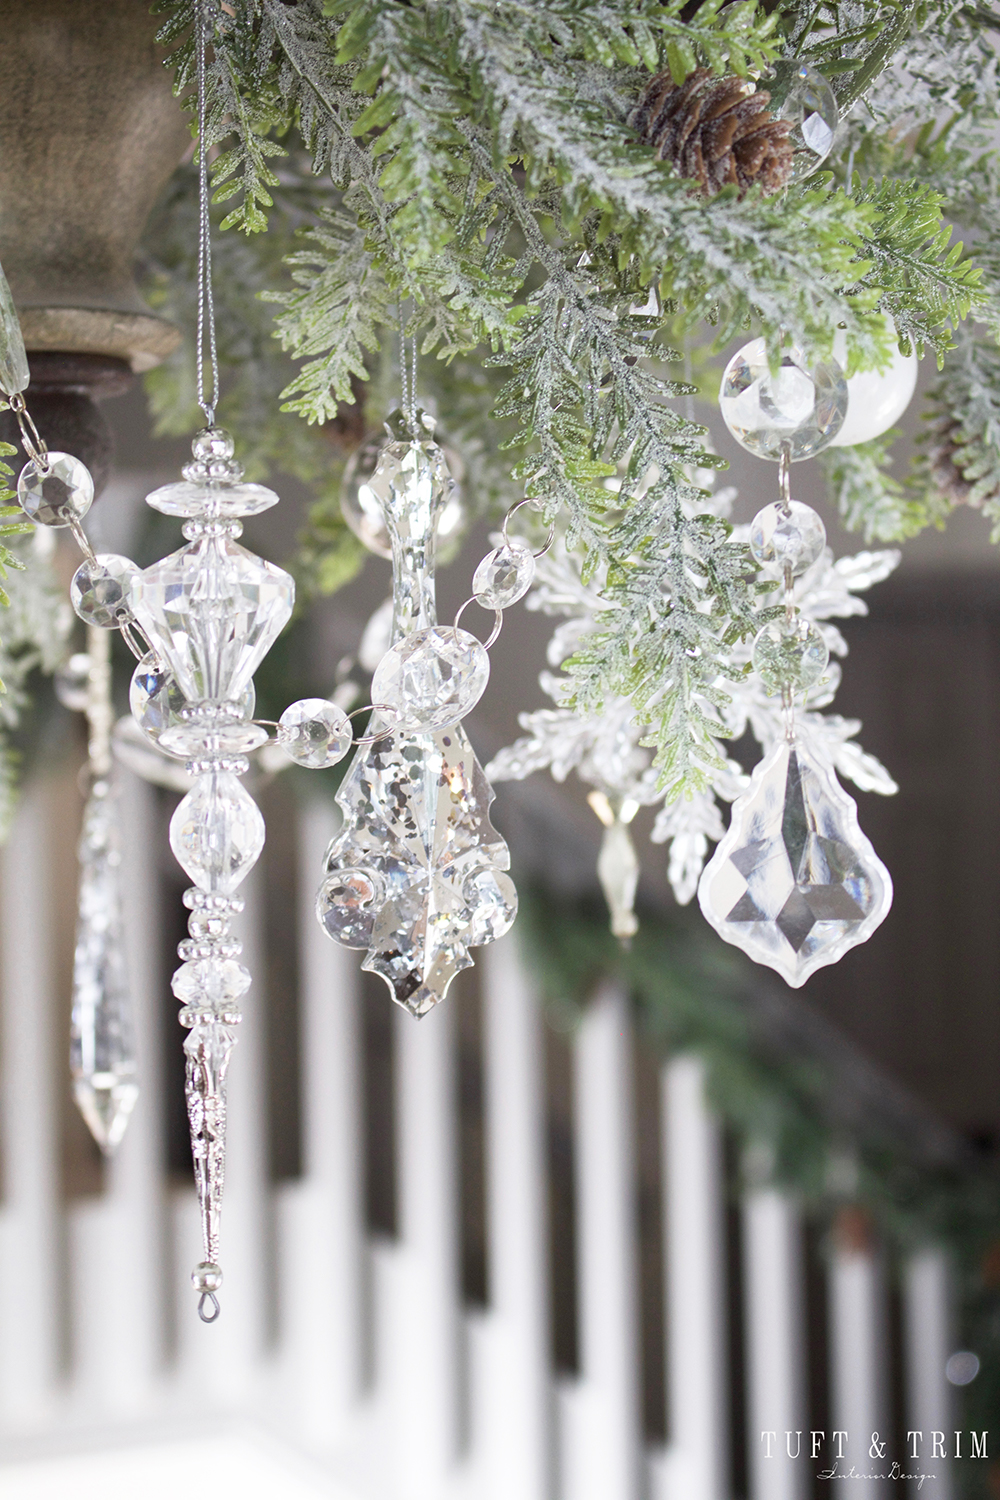 Elegant White Christmas Tablescape. Shop the look at Tuft & Trim